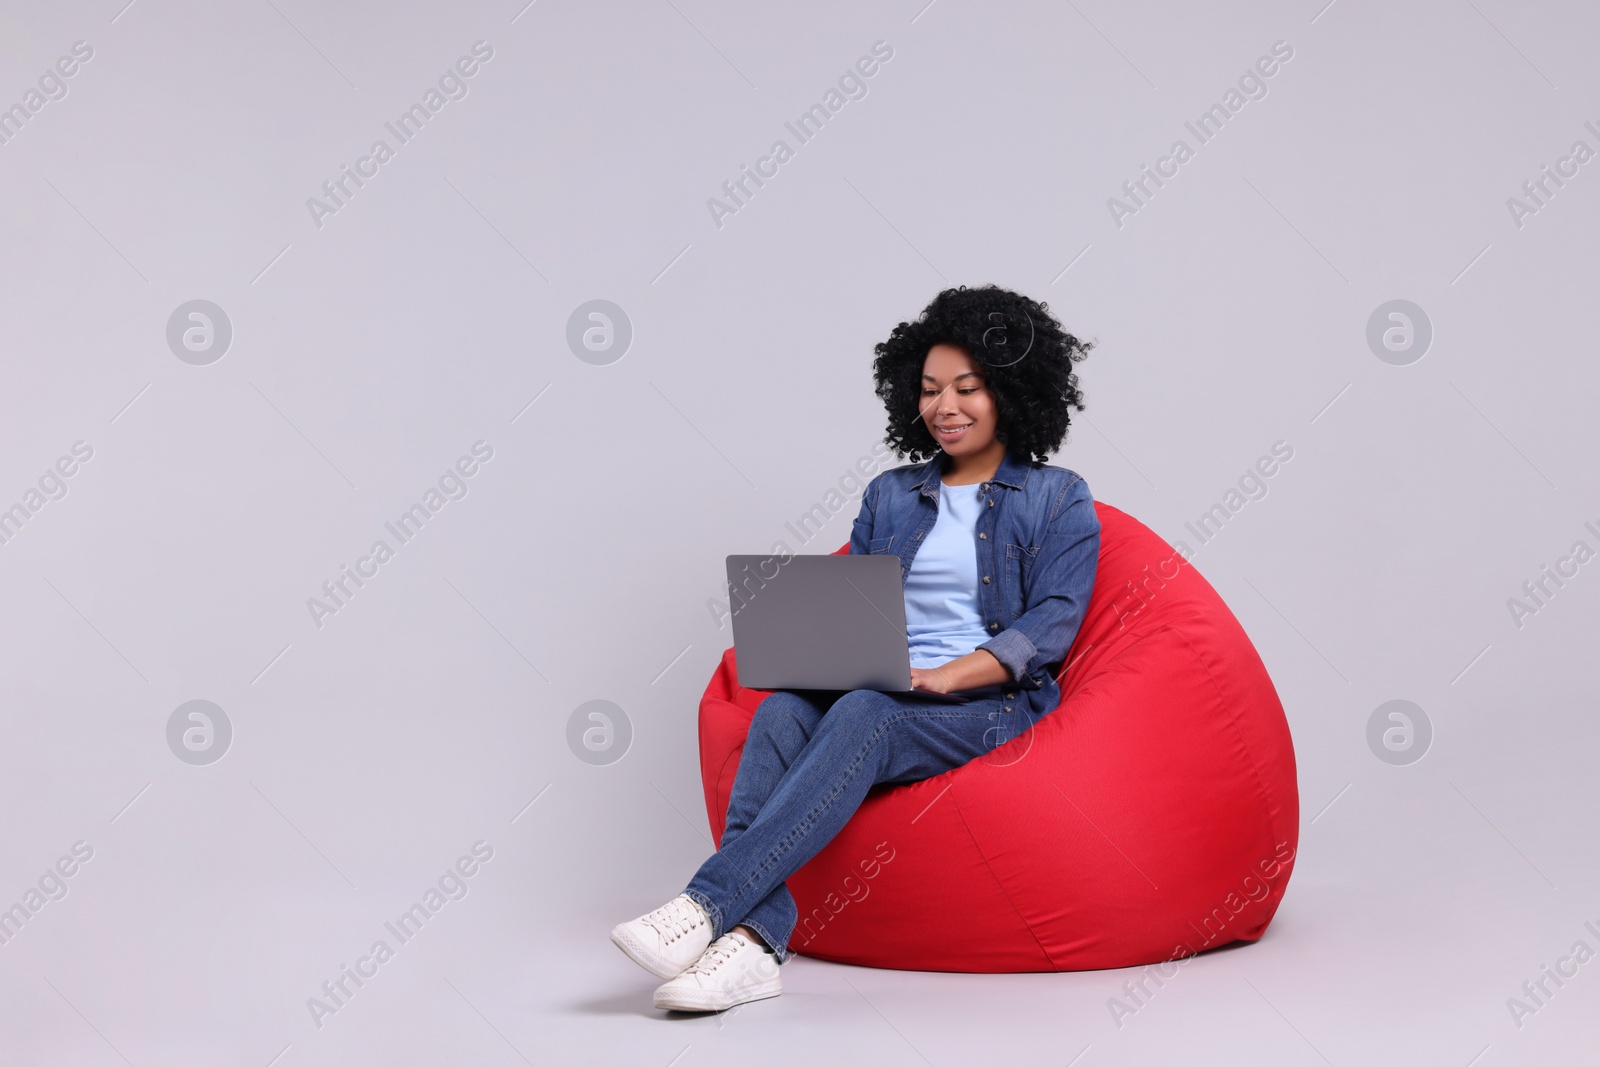 Photo of Happy young woman with laptop sitting on beanbag chair against light grey background. Space for text